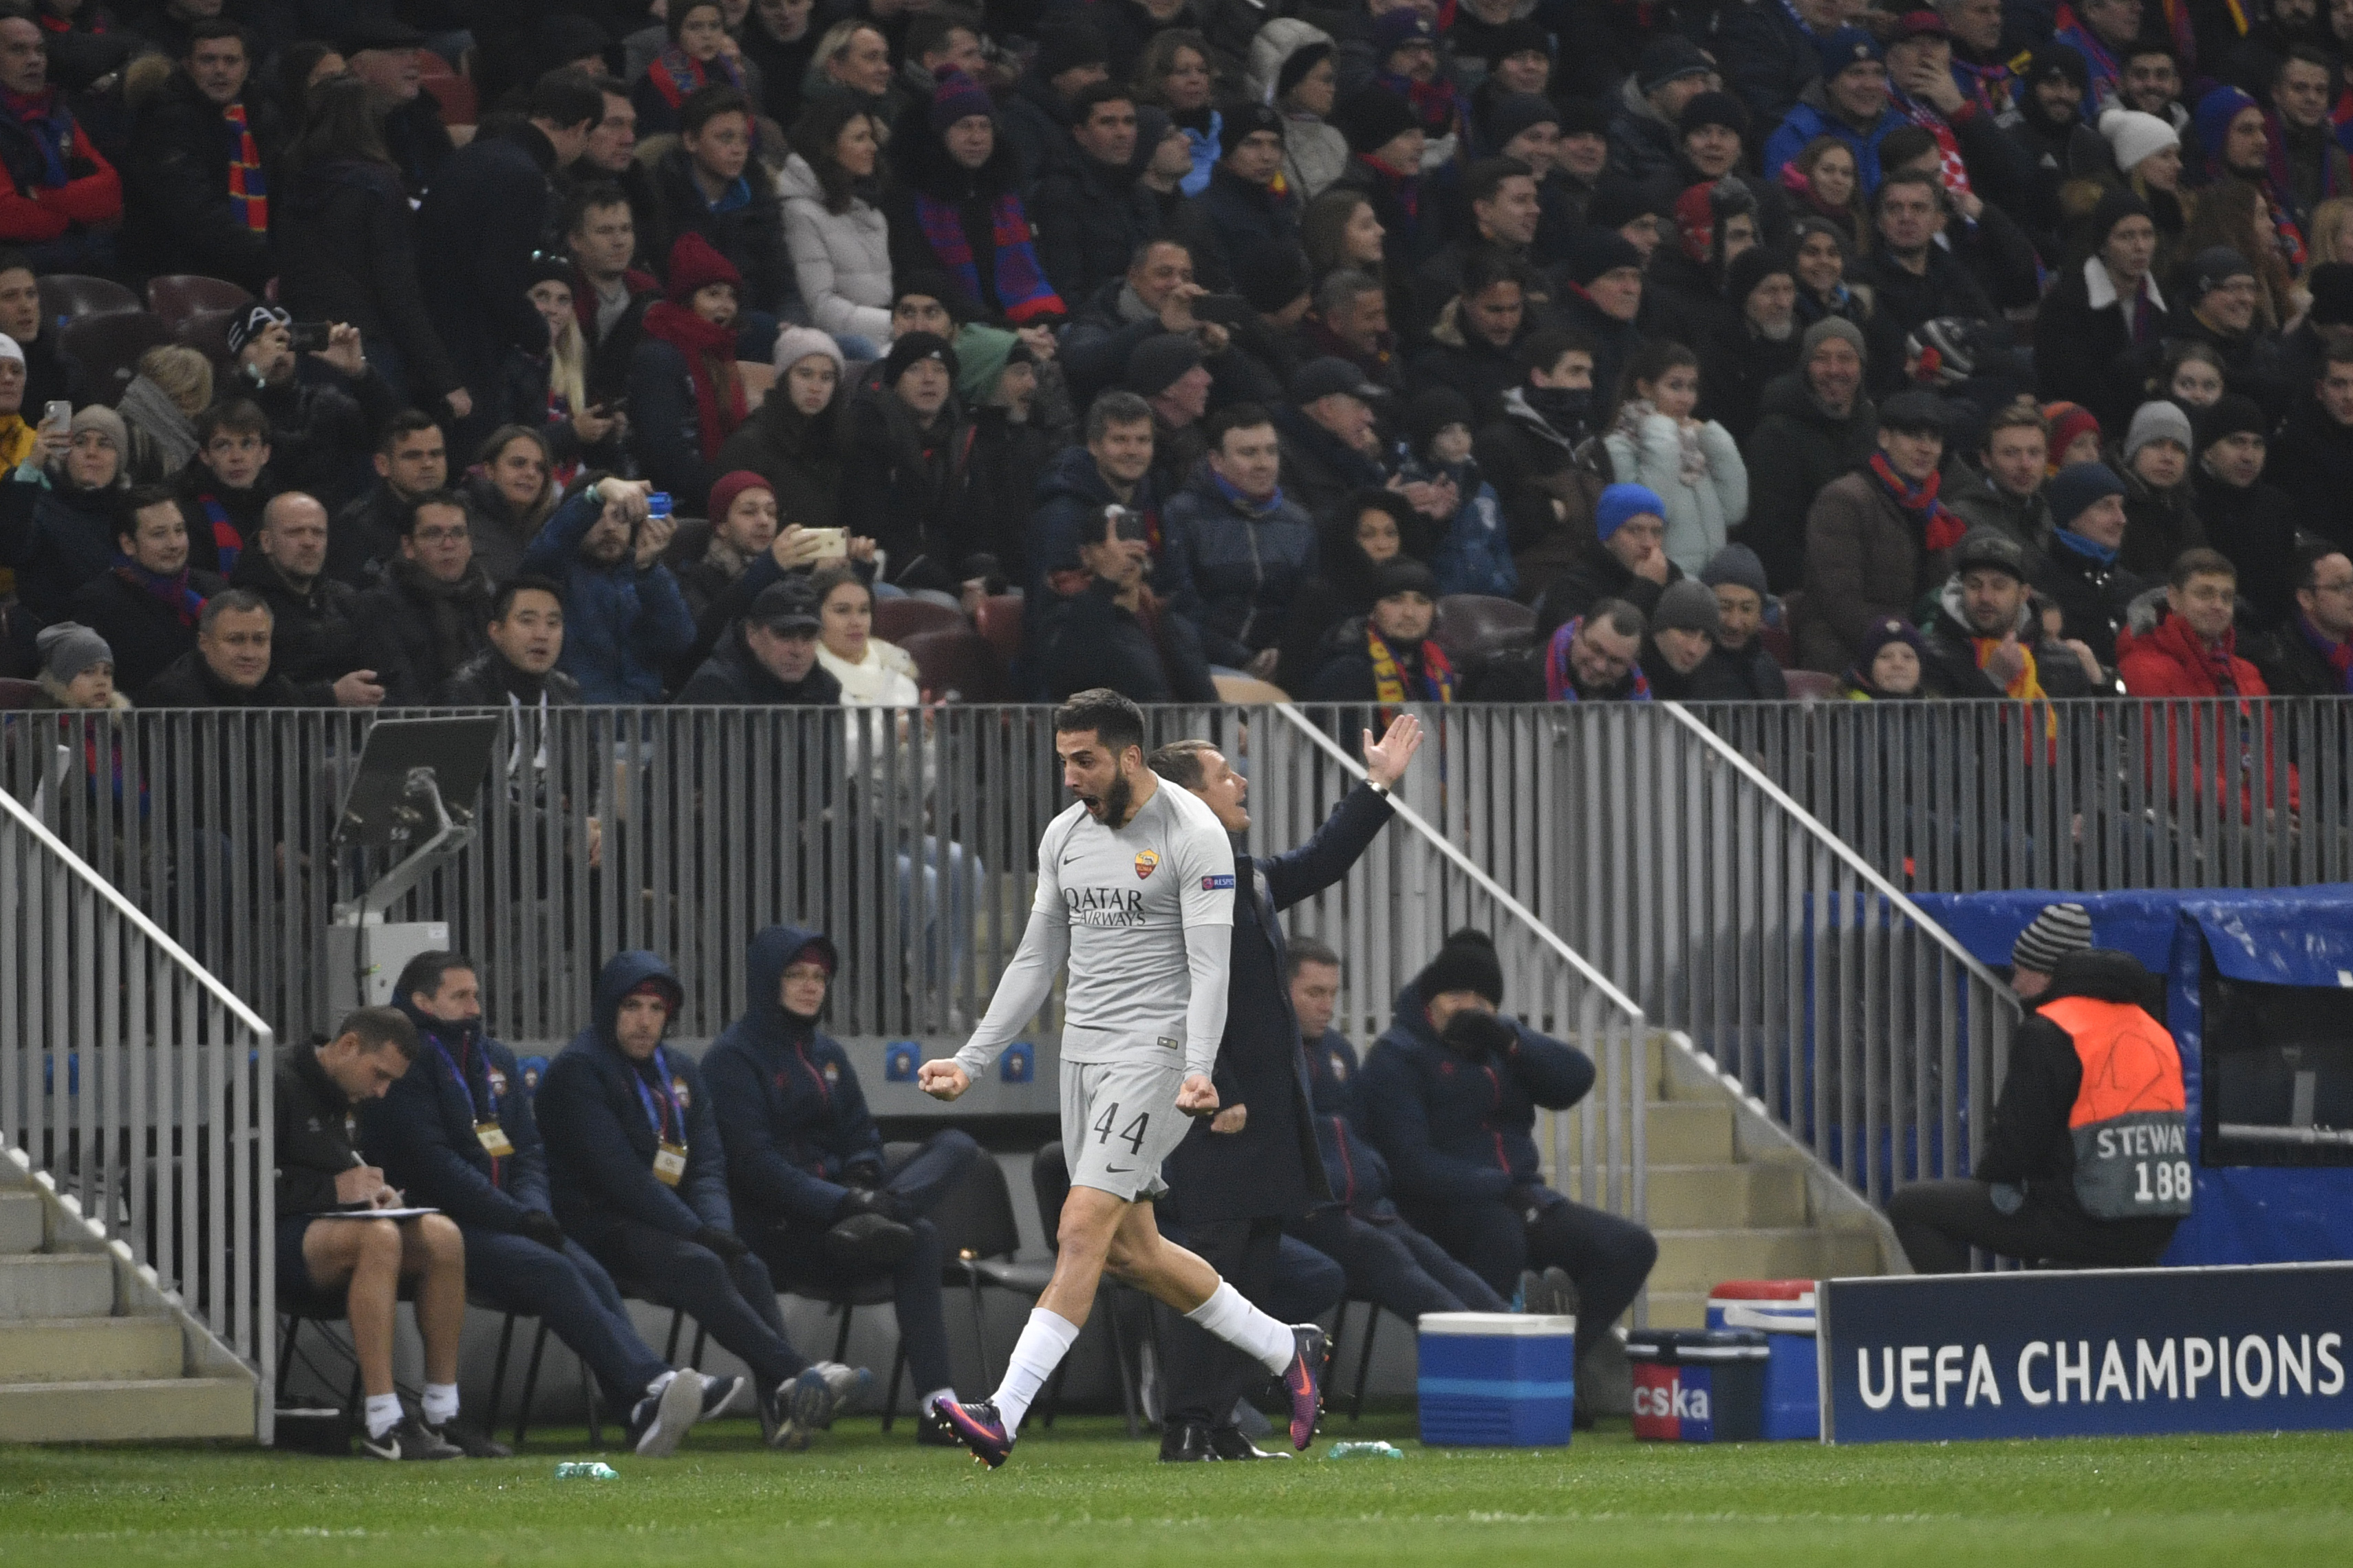 AS Roma Greek defender Konstantinos Manolas celebrates after scoring a goal during the UEFA Champions League group G football match between PFC CSKA Moscow and AS Roma at the Luzhniki stadium in Moscow on November 7, 2018. (Photo by Alexander NEMENOV / AFP)        (Photo credit should read ALEXANDER NEMENOV/AFP/Getty Images)